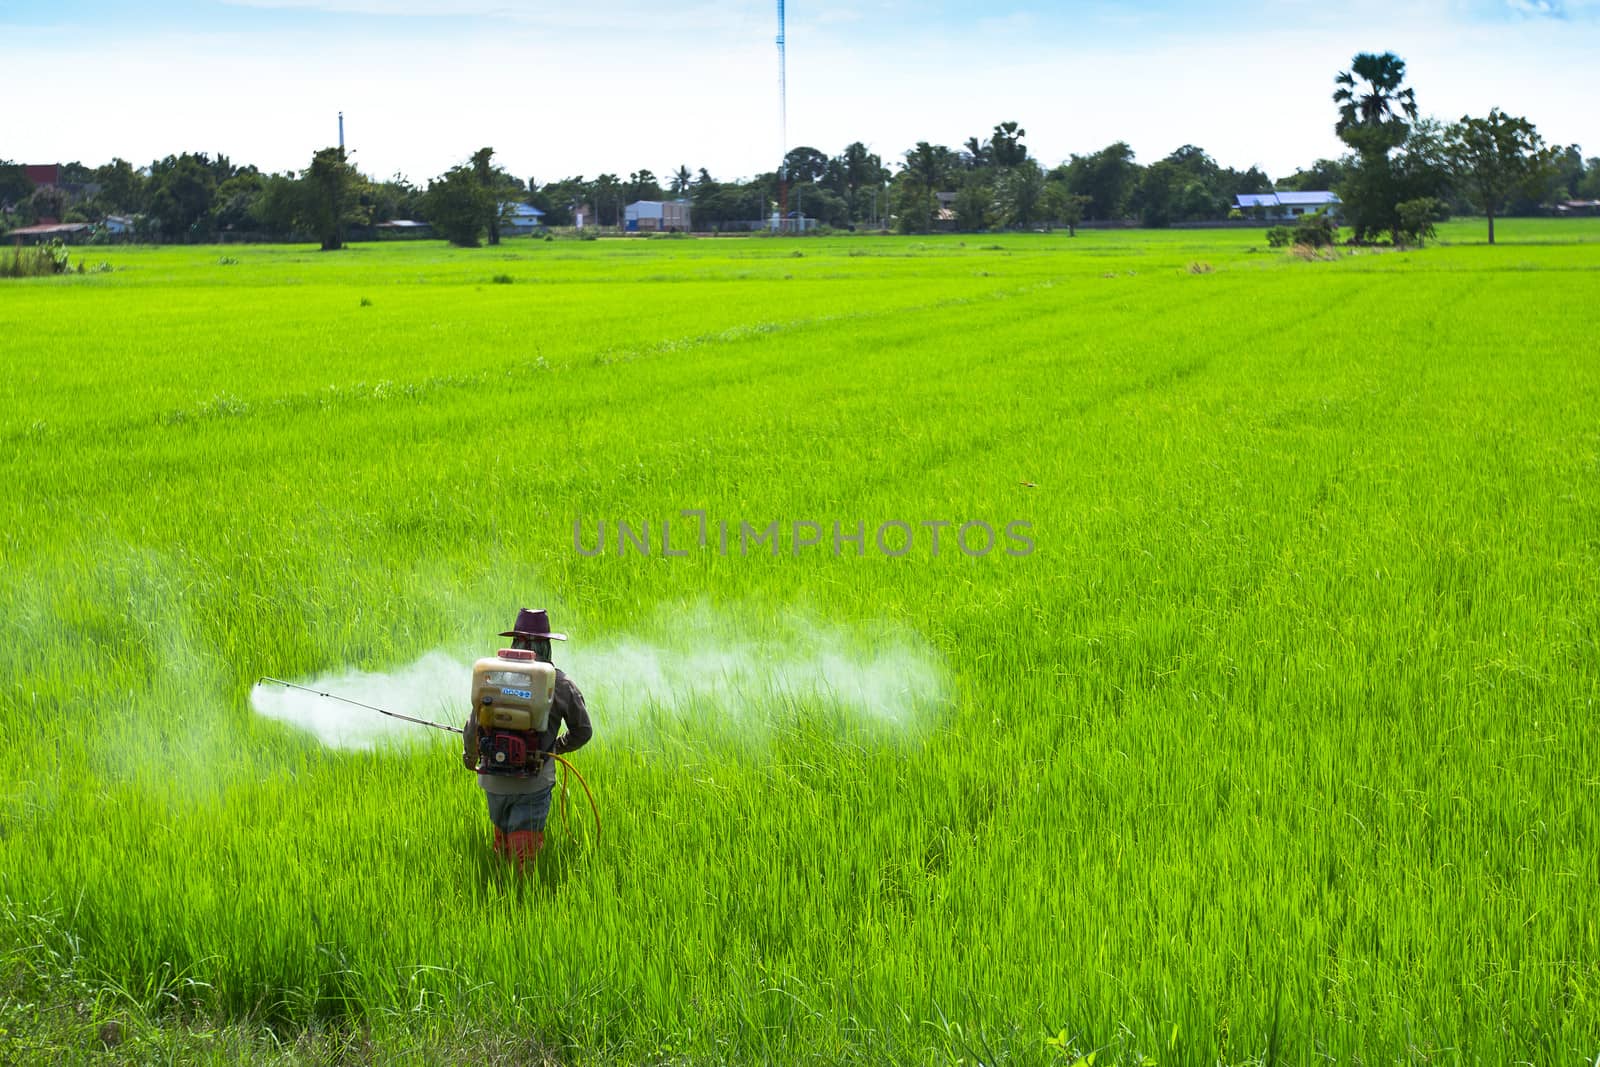 Rice field, the main agriculture of Thailand